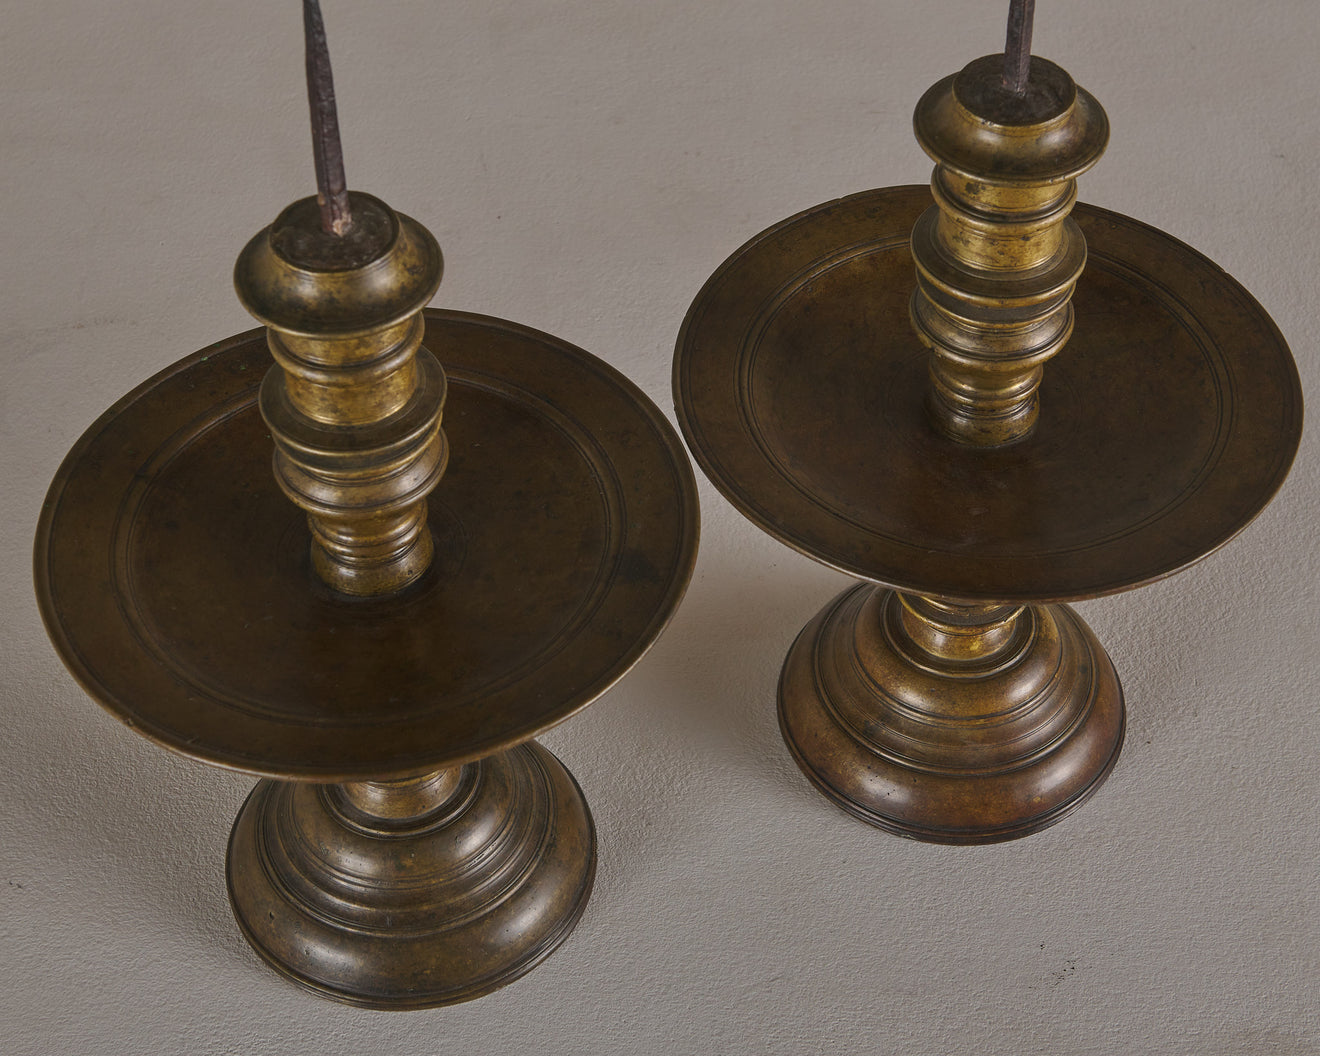 PAIR OF DUTCH COLONIAL SHIP CAPTAIN'S PRICKETS